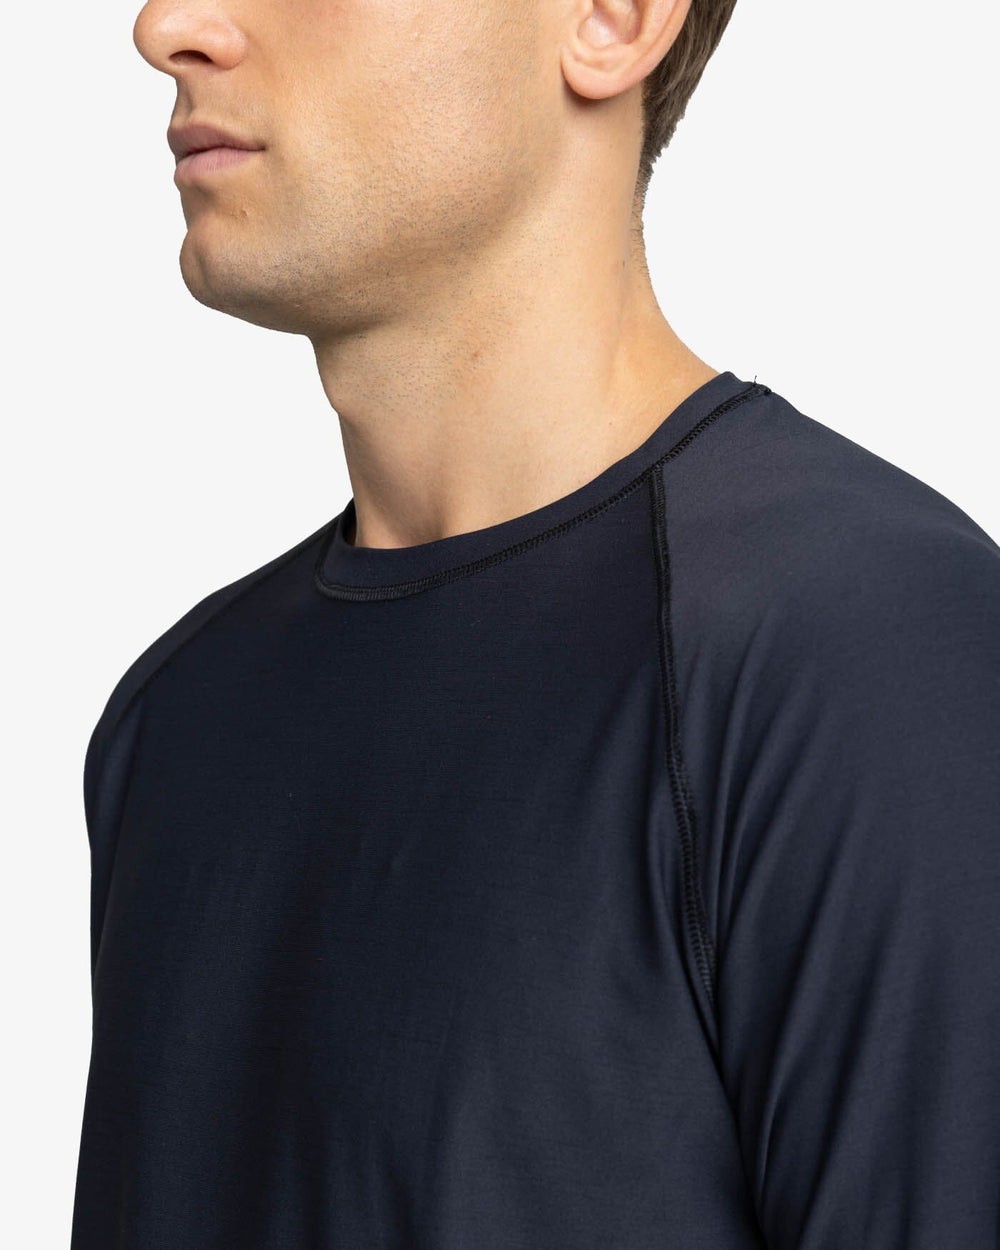 The detail view of the Southern Tide brrr-illiant Performance Long Sleeve T-Shirt by Southern Tide - Caviar Black